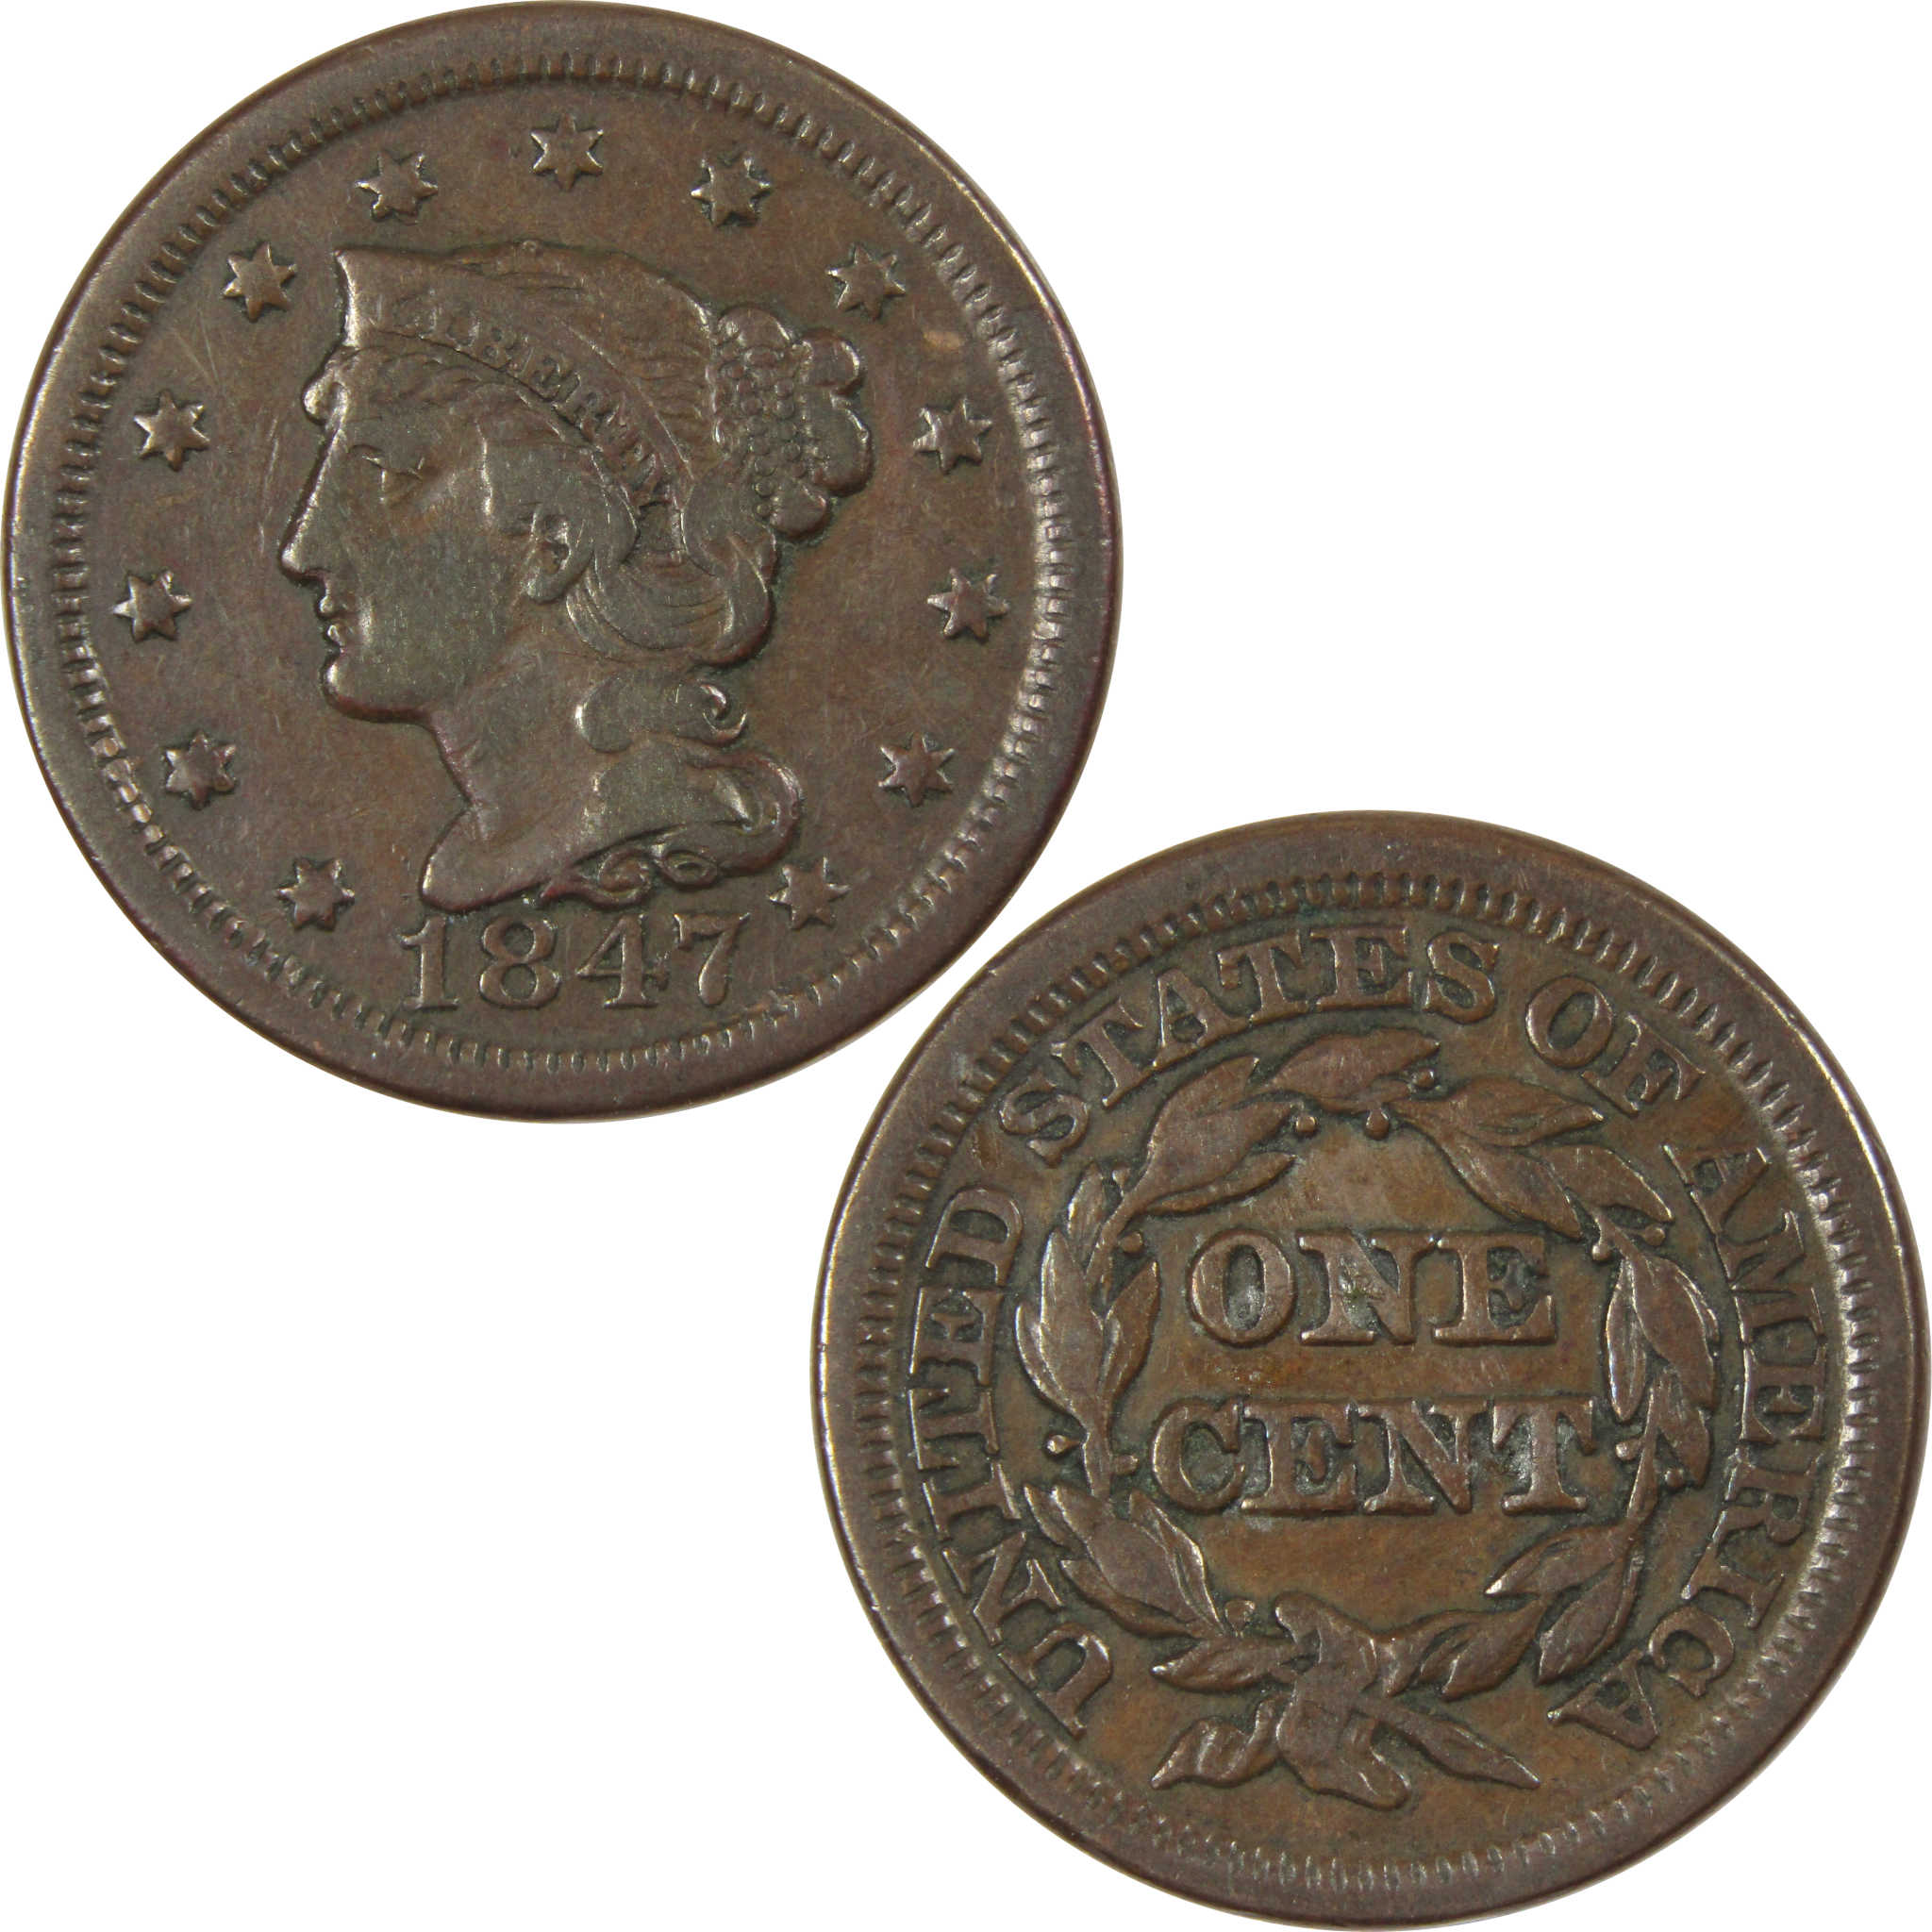 1847 Braided Hair Large Cent VF Very Fine Copper Penny 1c SKU:IPC7042